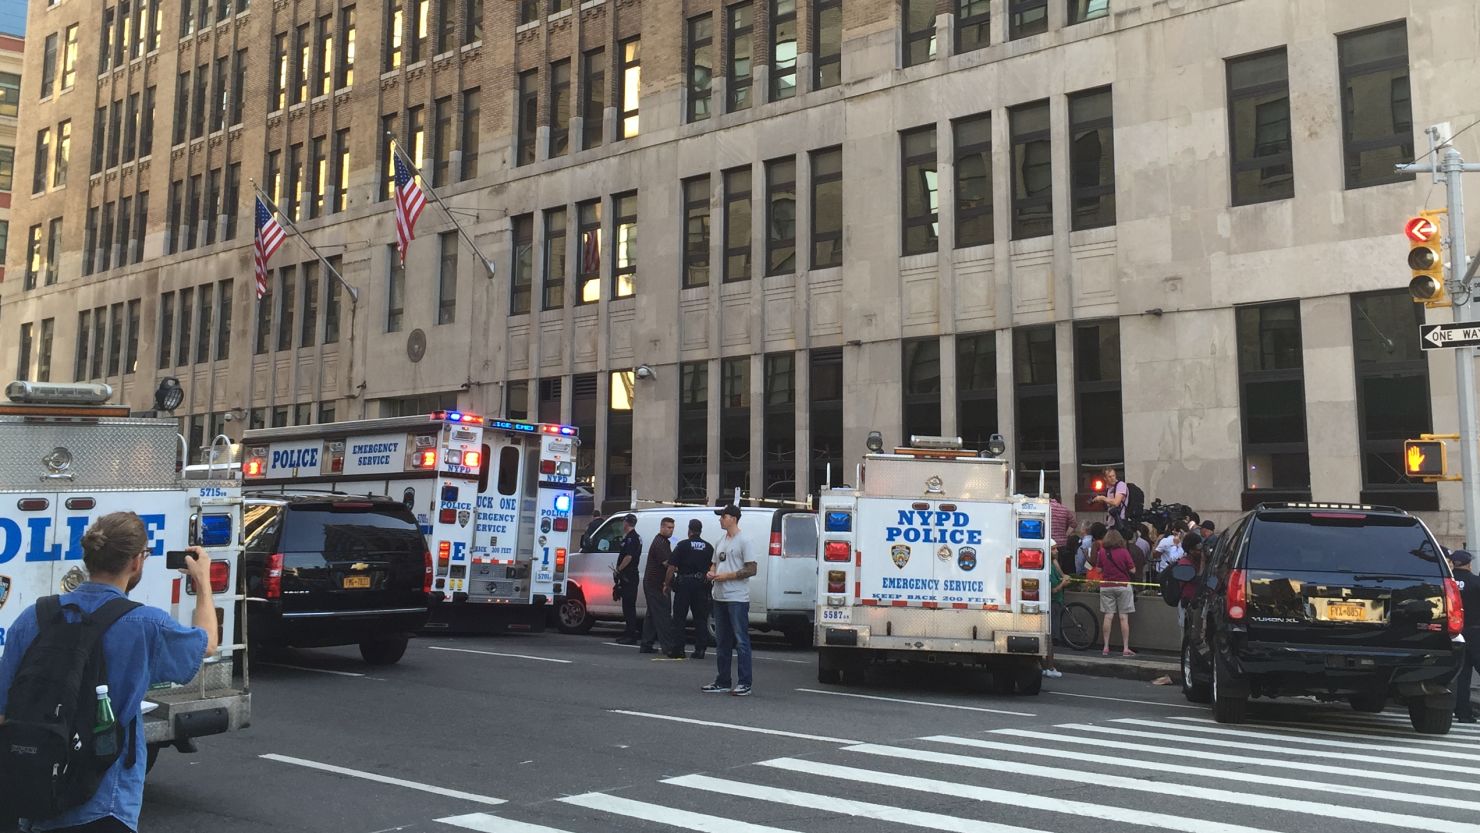 A heavy police presence outside the federal building entrance on Varick Street in New York. 